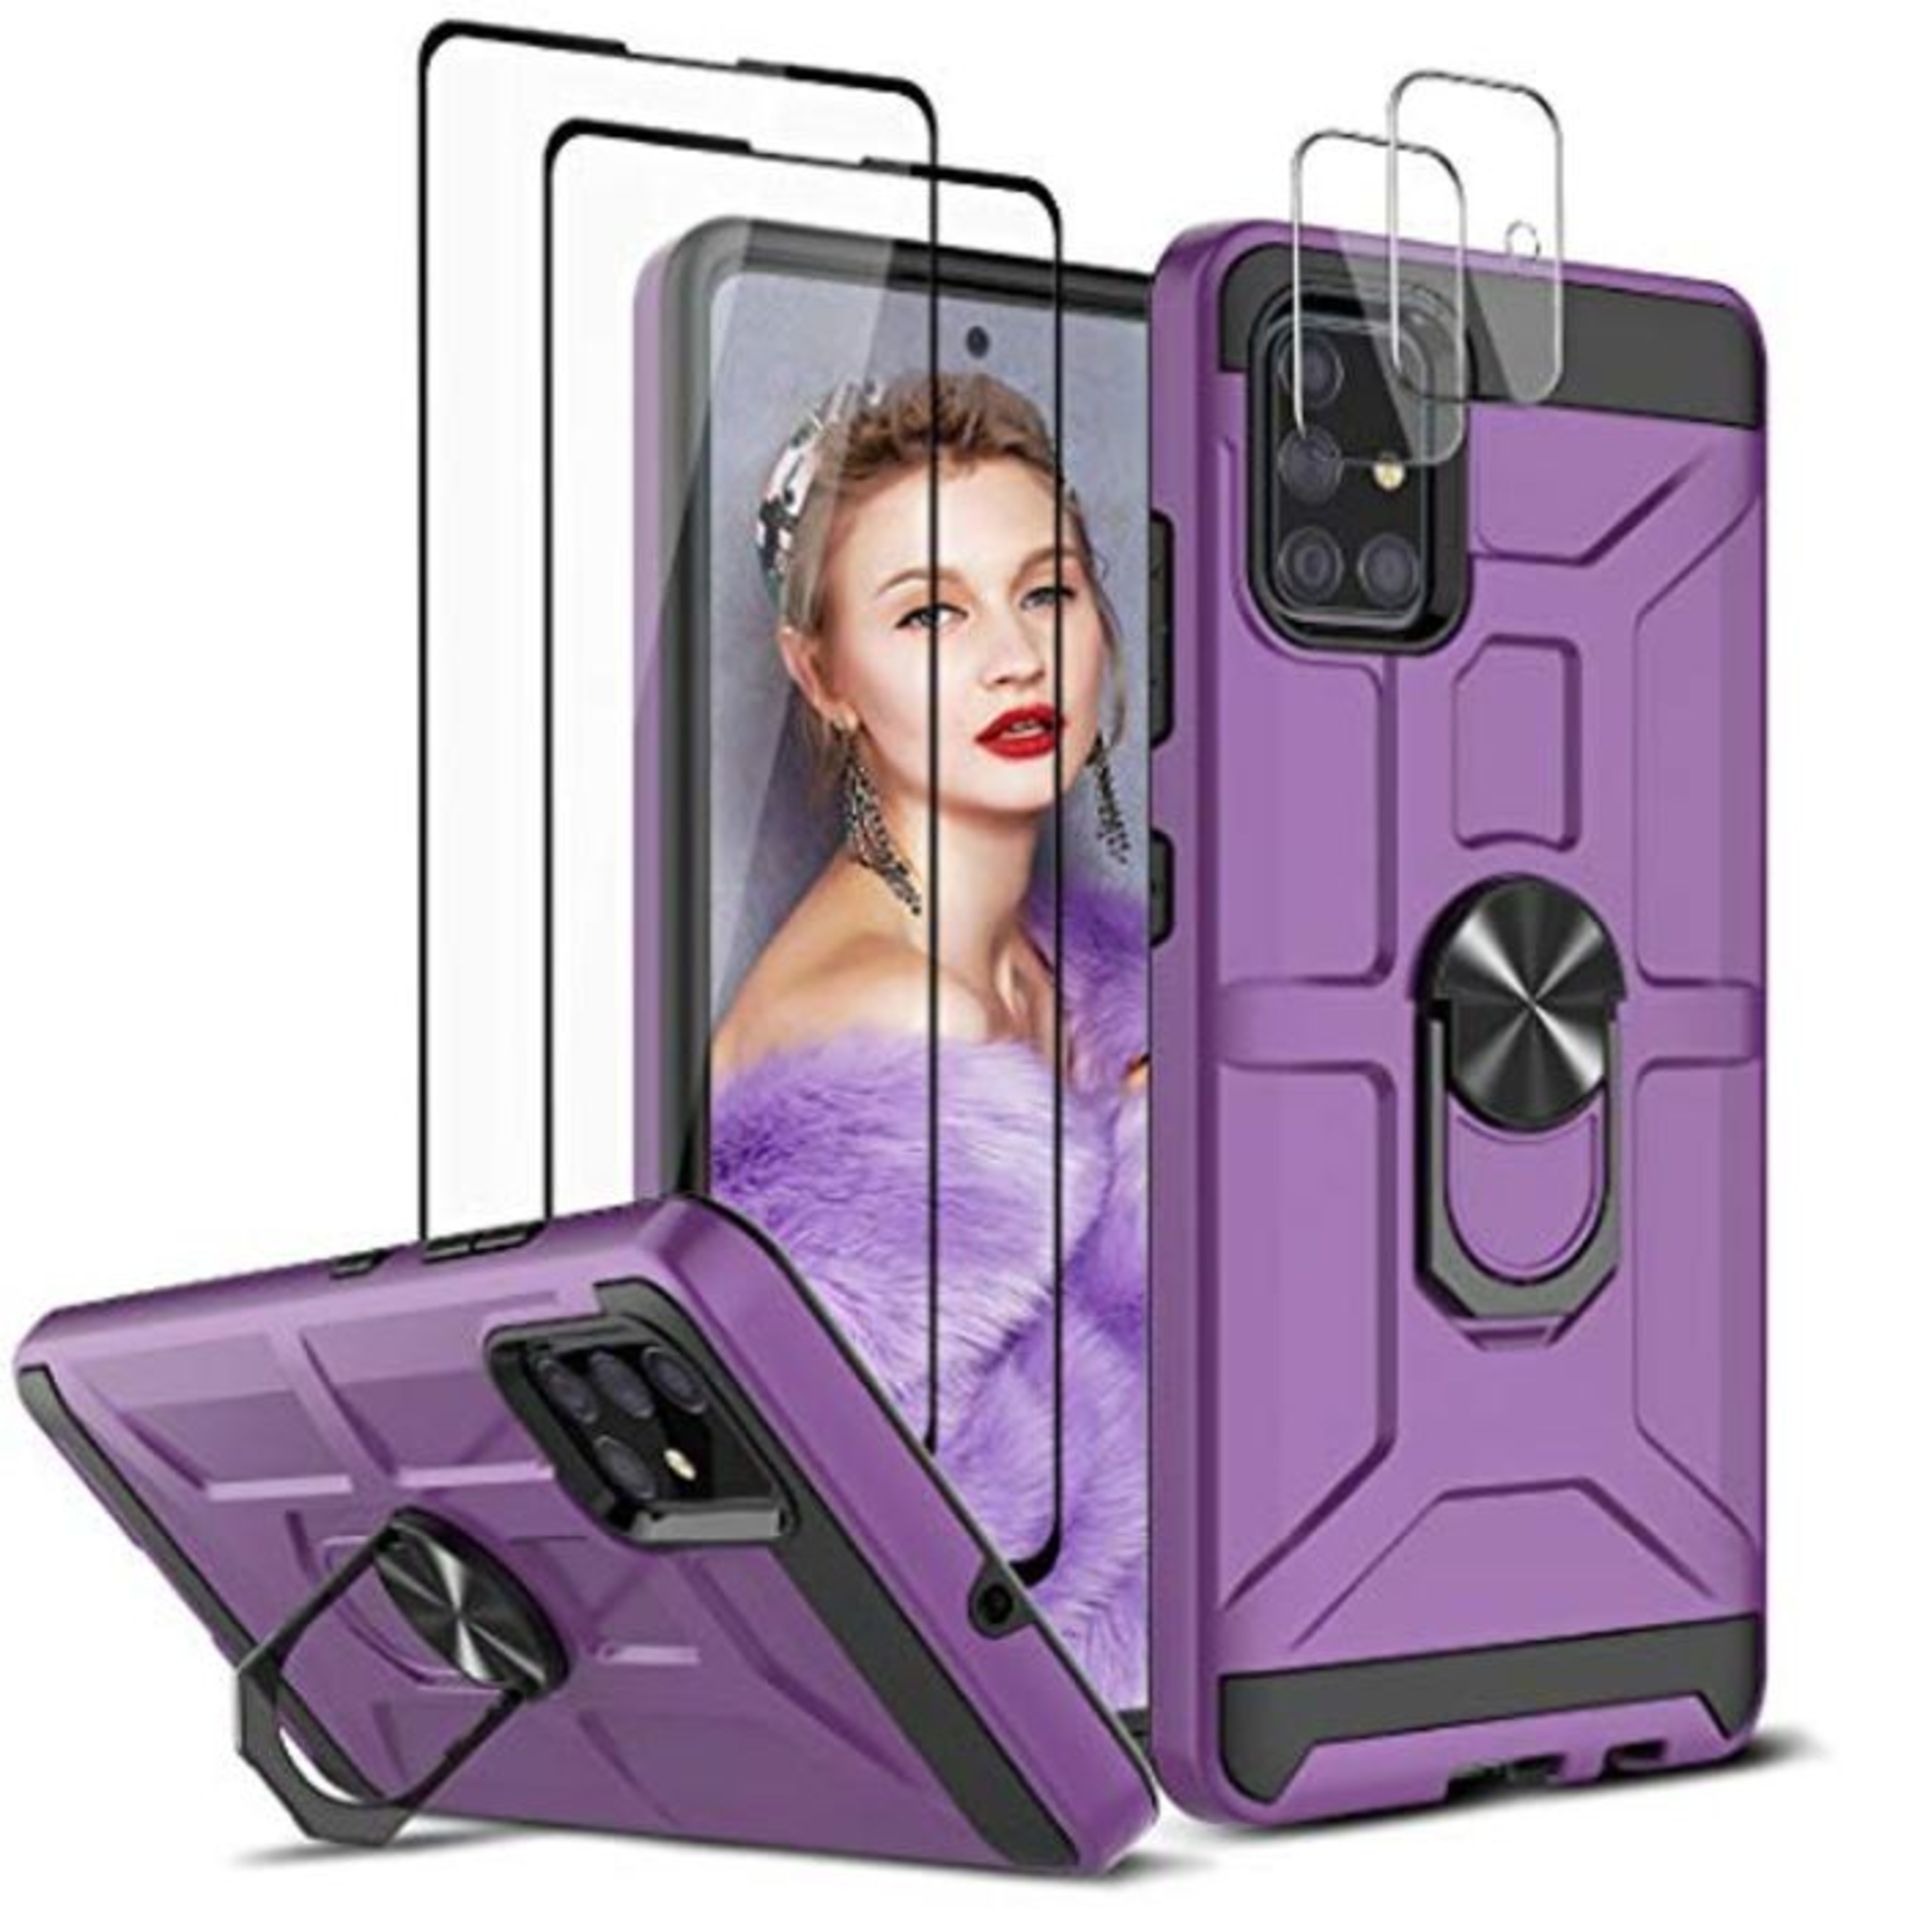 COMBINED RRP £1642.00 LOT TO CONTAIN 174 ASSORTED Tech Products: Amazon, OtterBox, Tec-Digi, Sc - Image 12 of 46